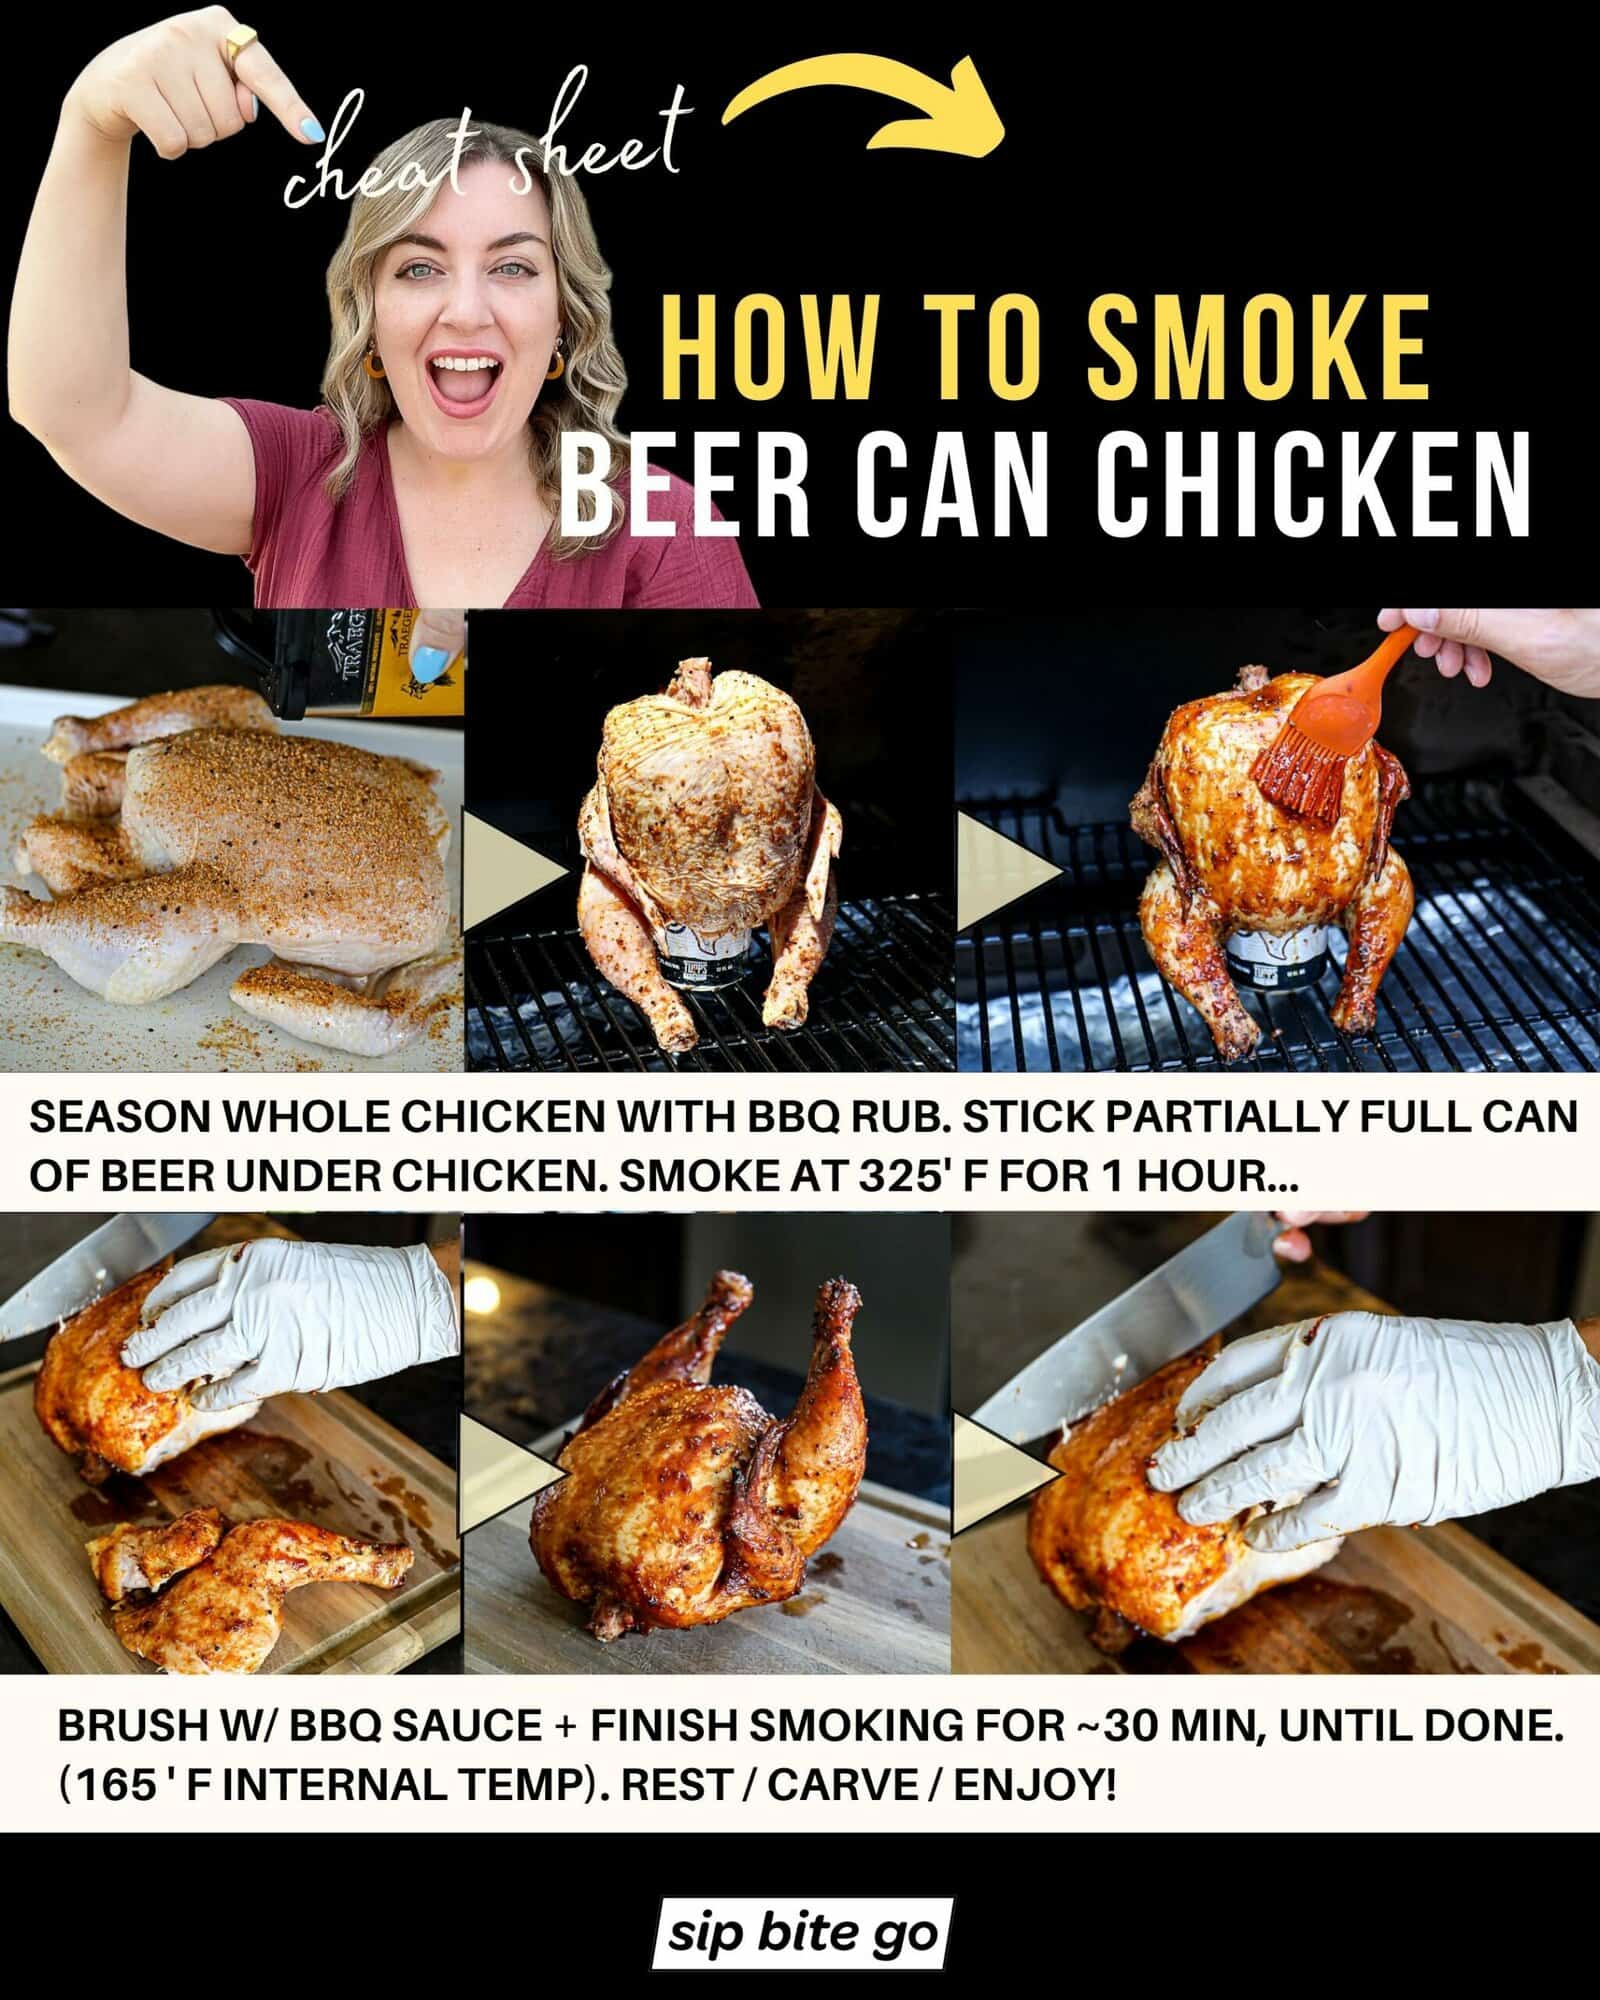 Infographic demonstrating recipe steps with captions describing how to smoke beer can chicken on Traeger Pellet Grills